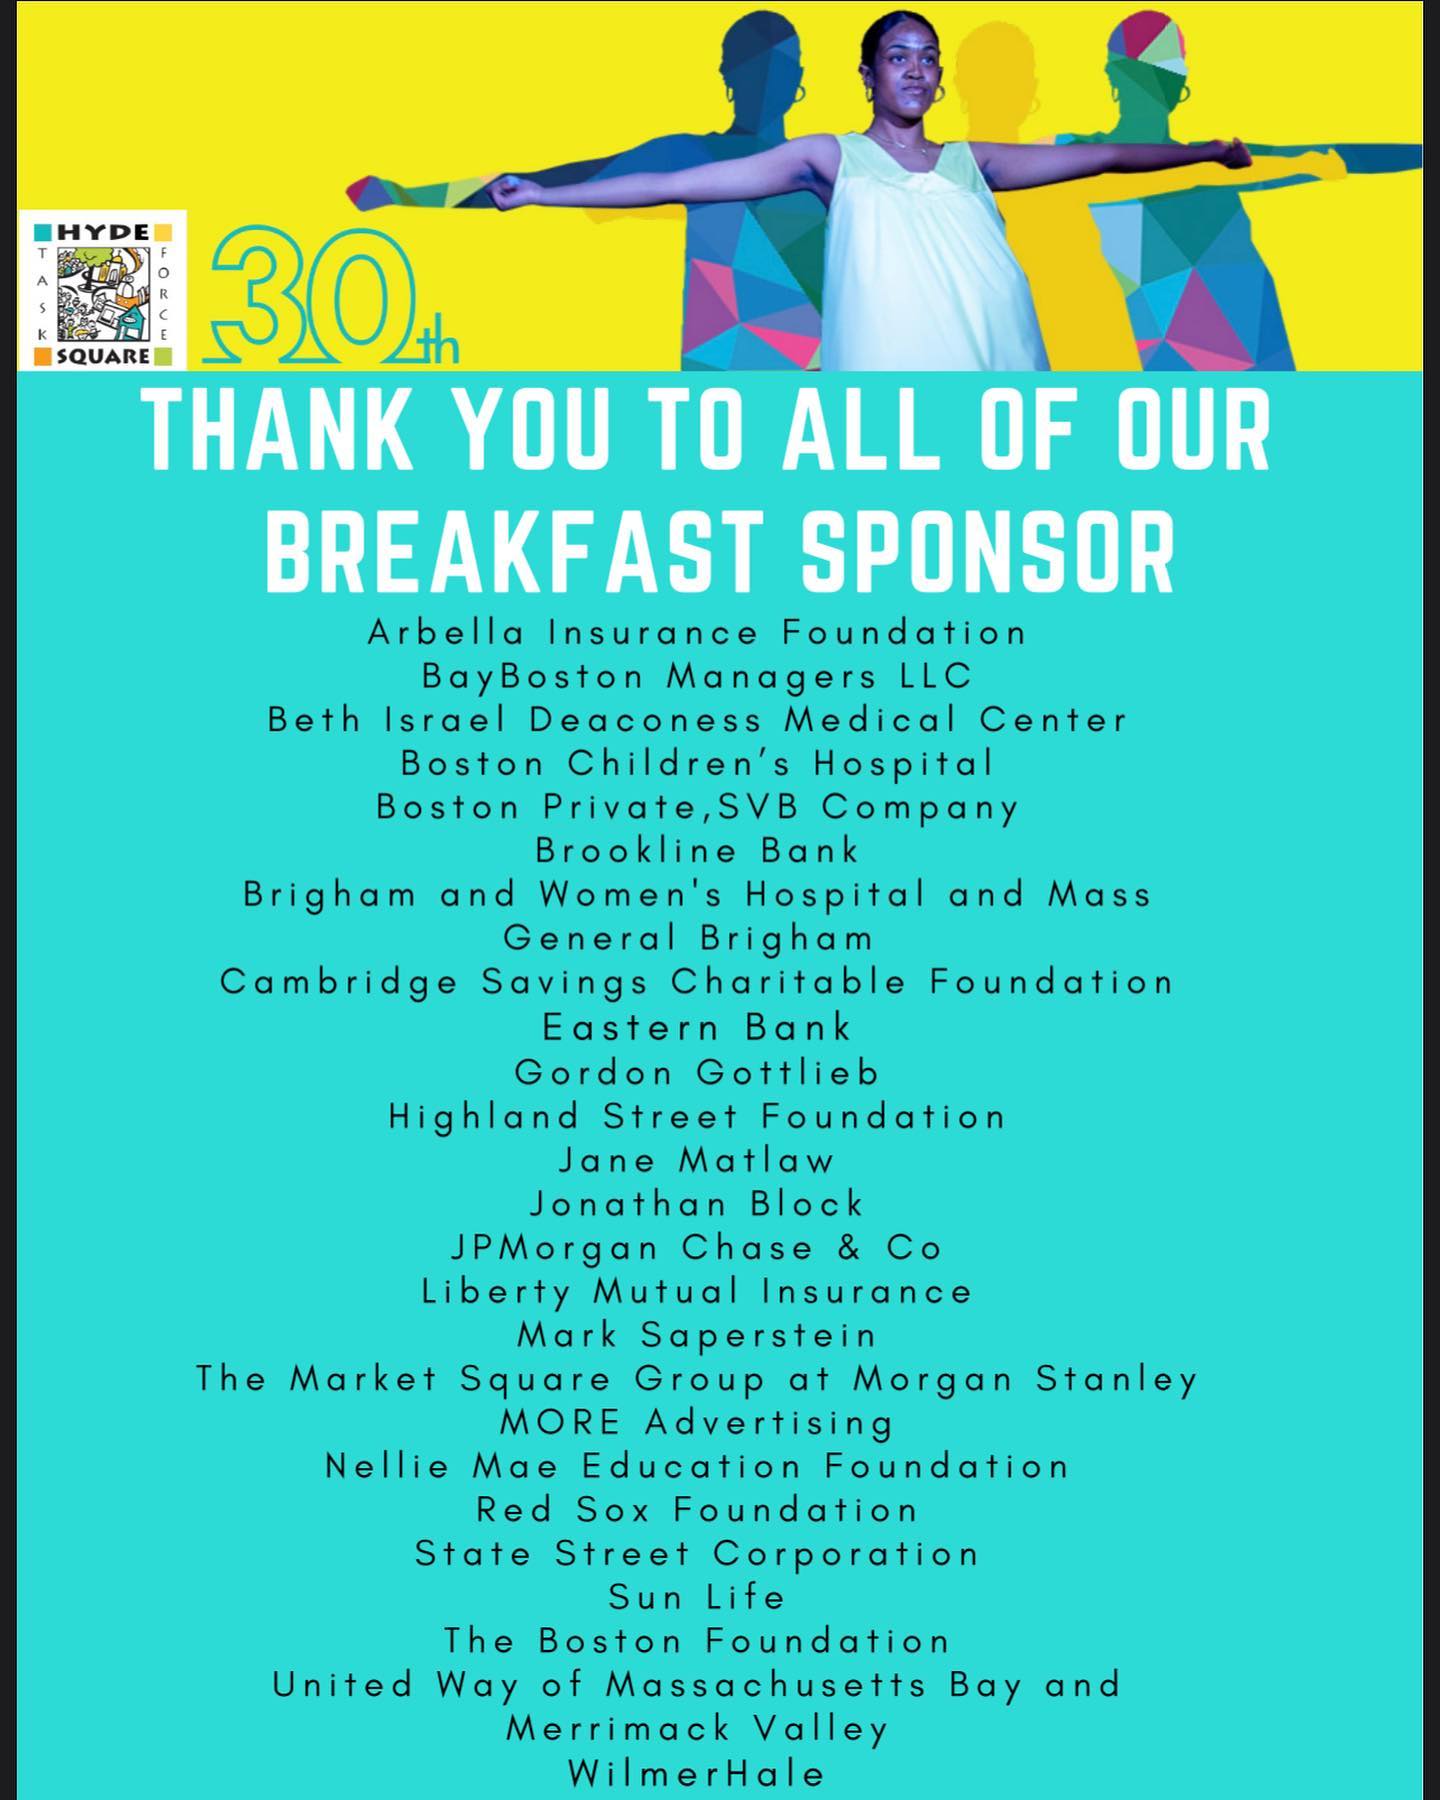 Our Making Change Happen Breakfast Event has ended. Thank you to everyone that attended and a huge thank you to all of our sponsors!